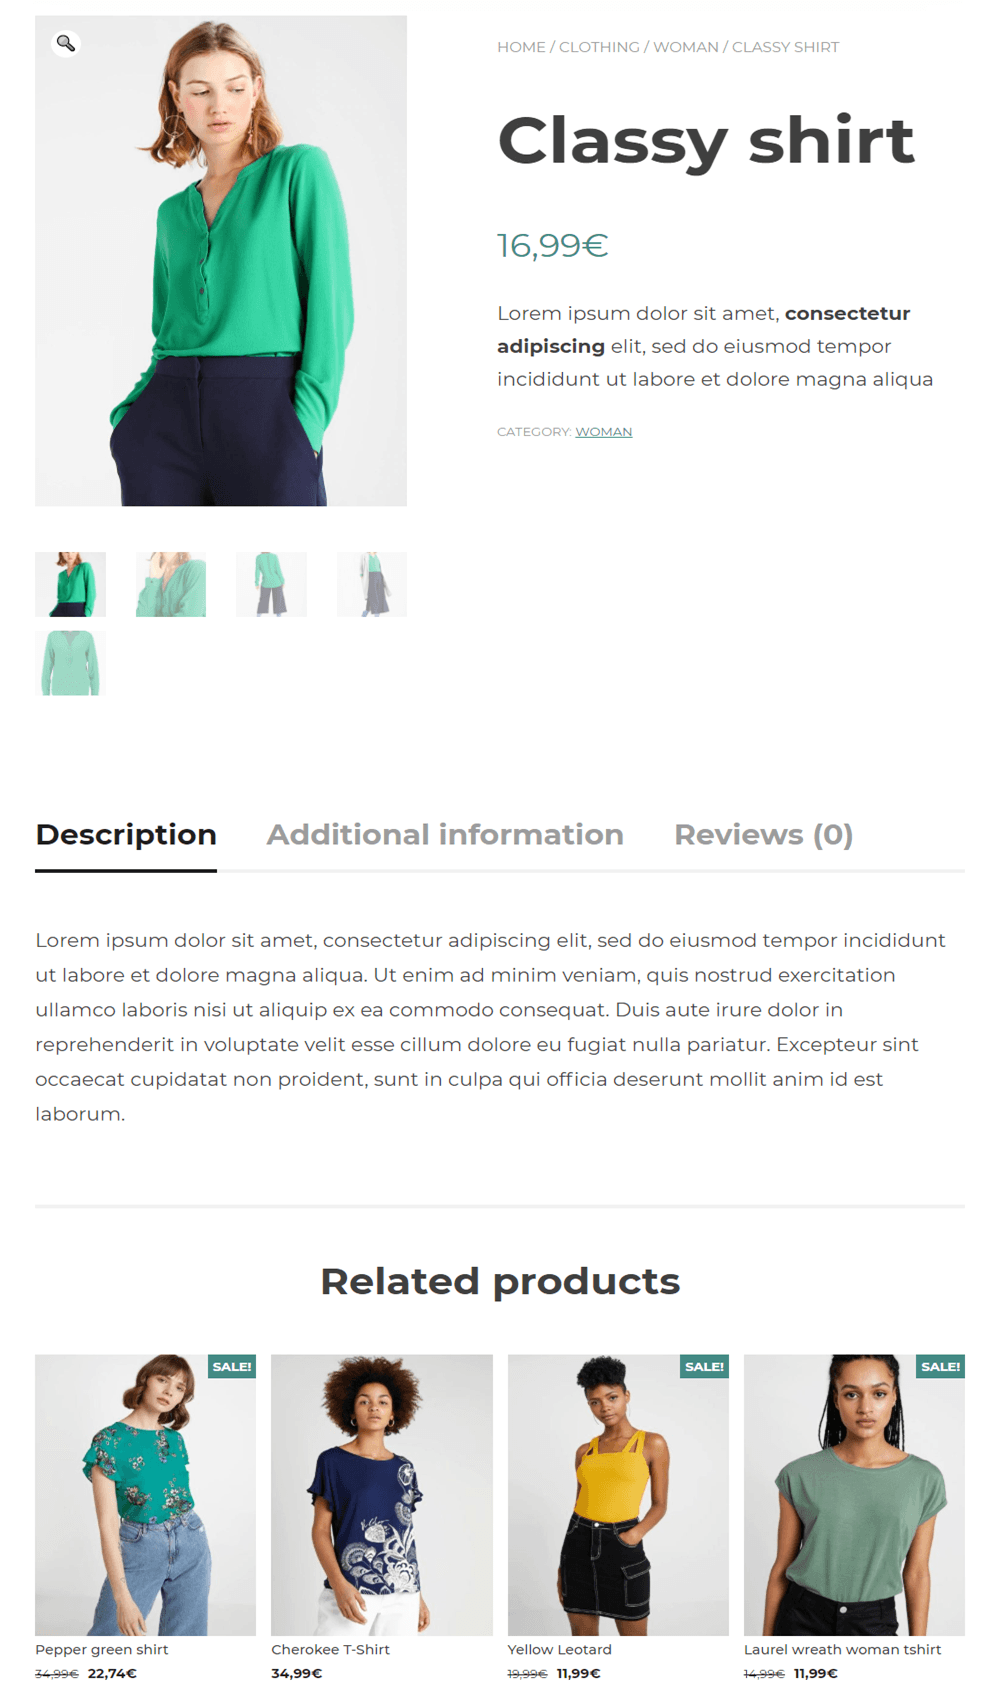 Classy Shirt Product Detail With Related Products Page In WooCommerce